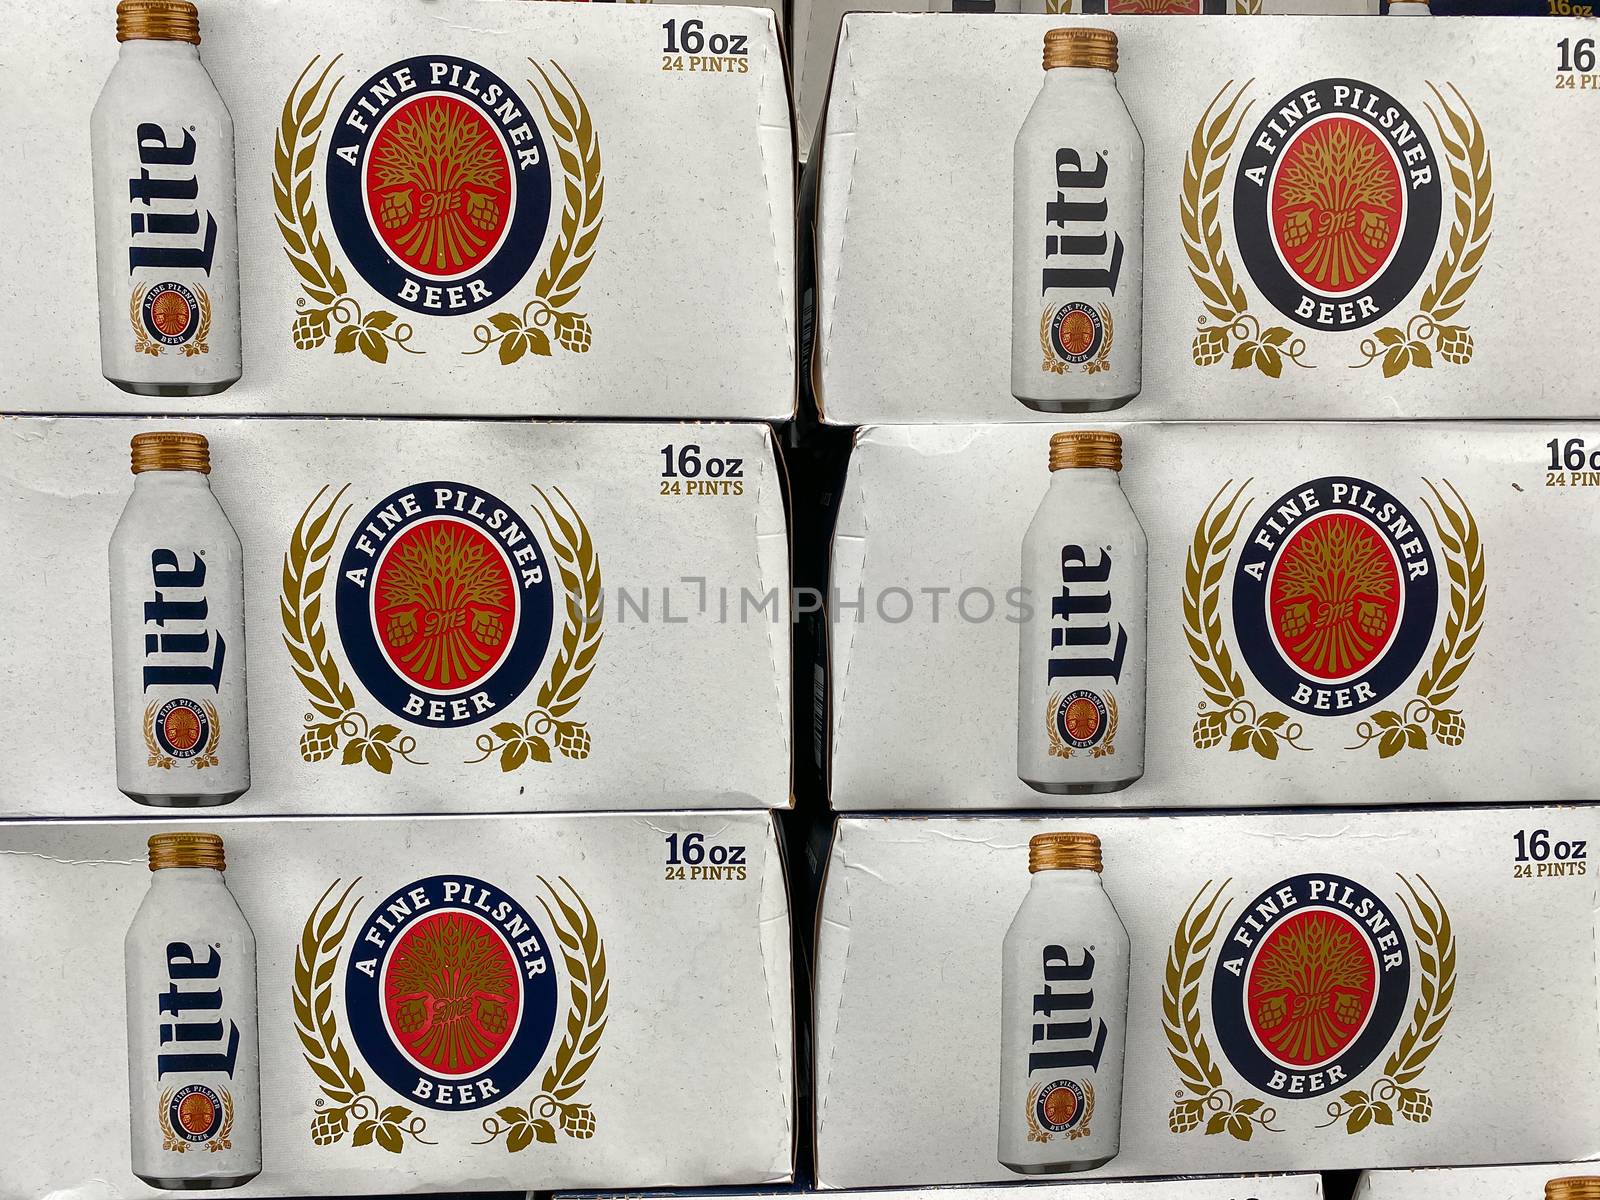 Cases of cans of Miller Lite Beer at a grocery store by Jshanebutt